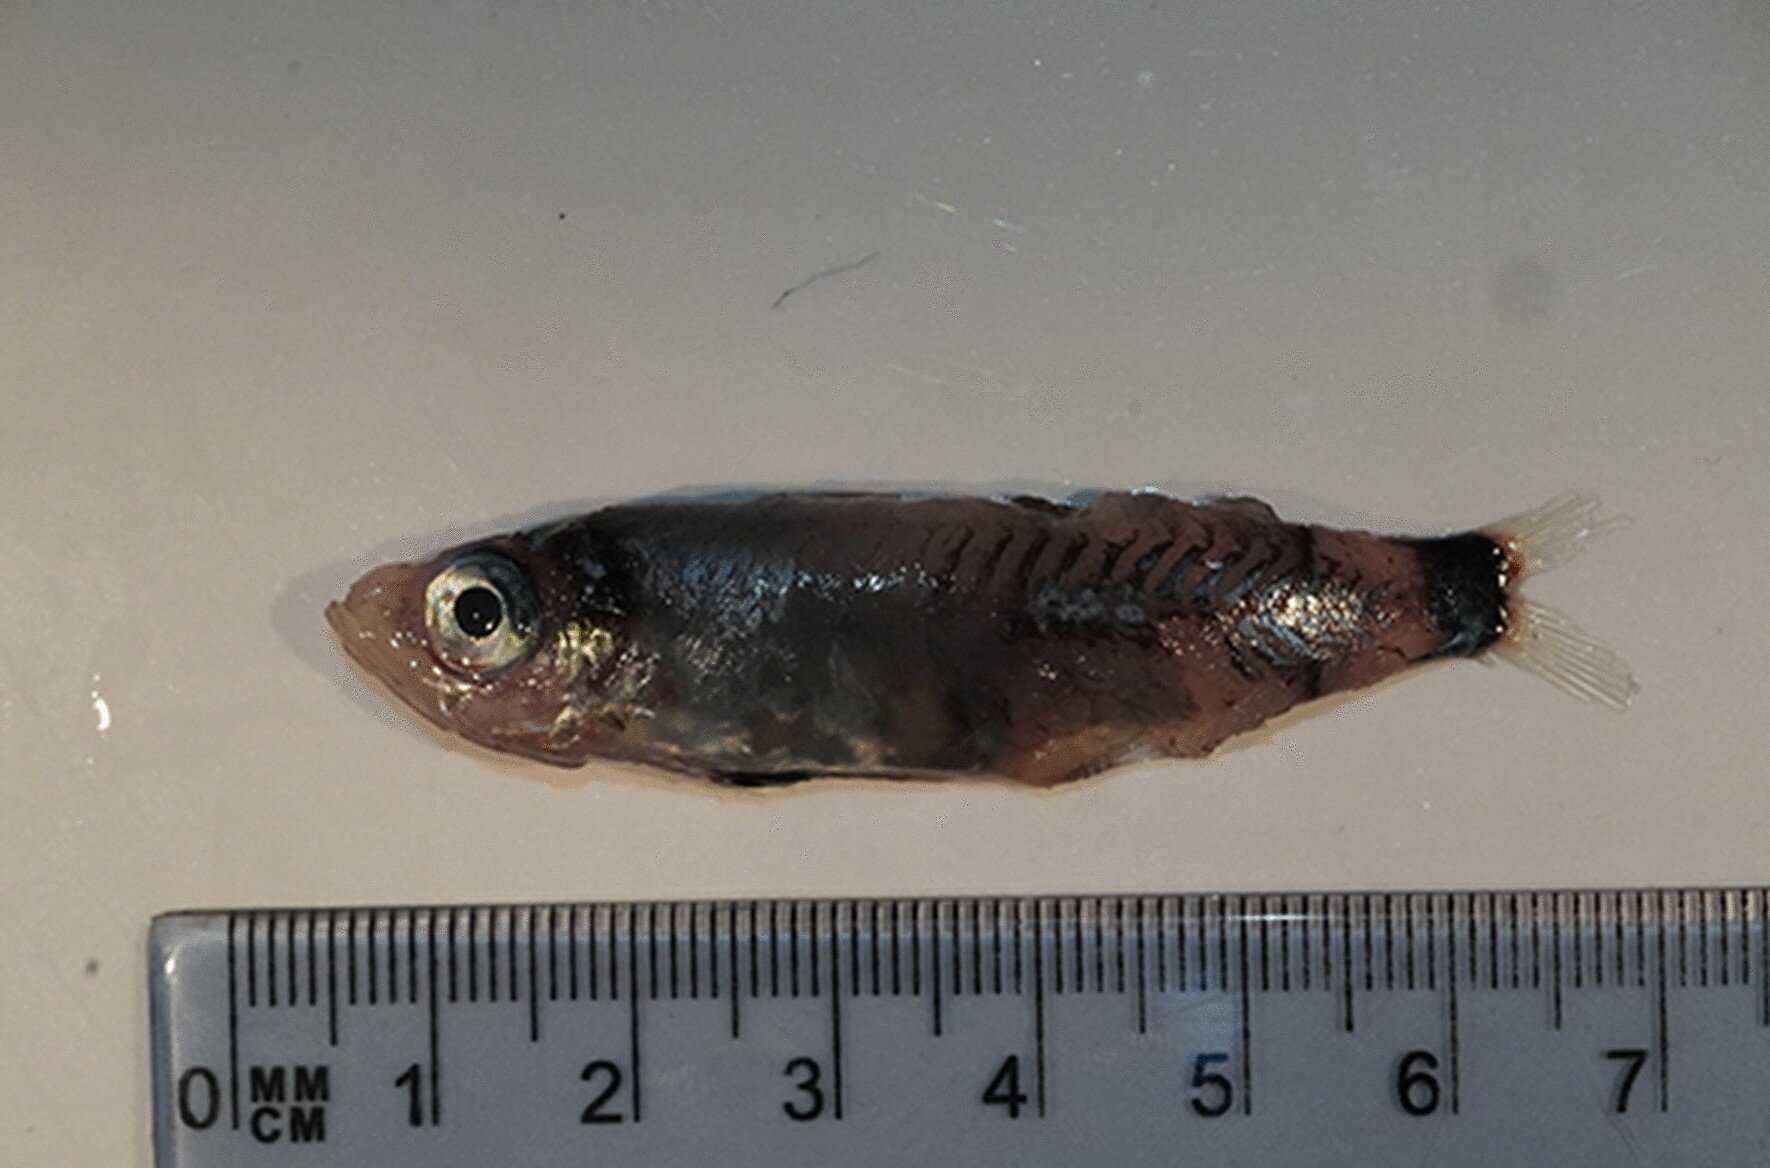 Researchers find a new fish species in the deep sea off Ireland